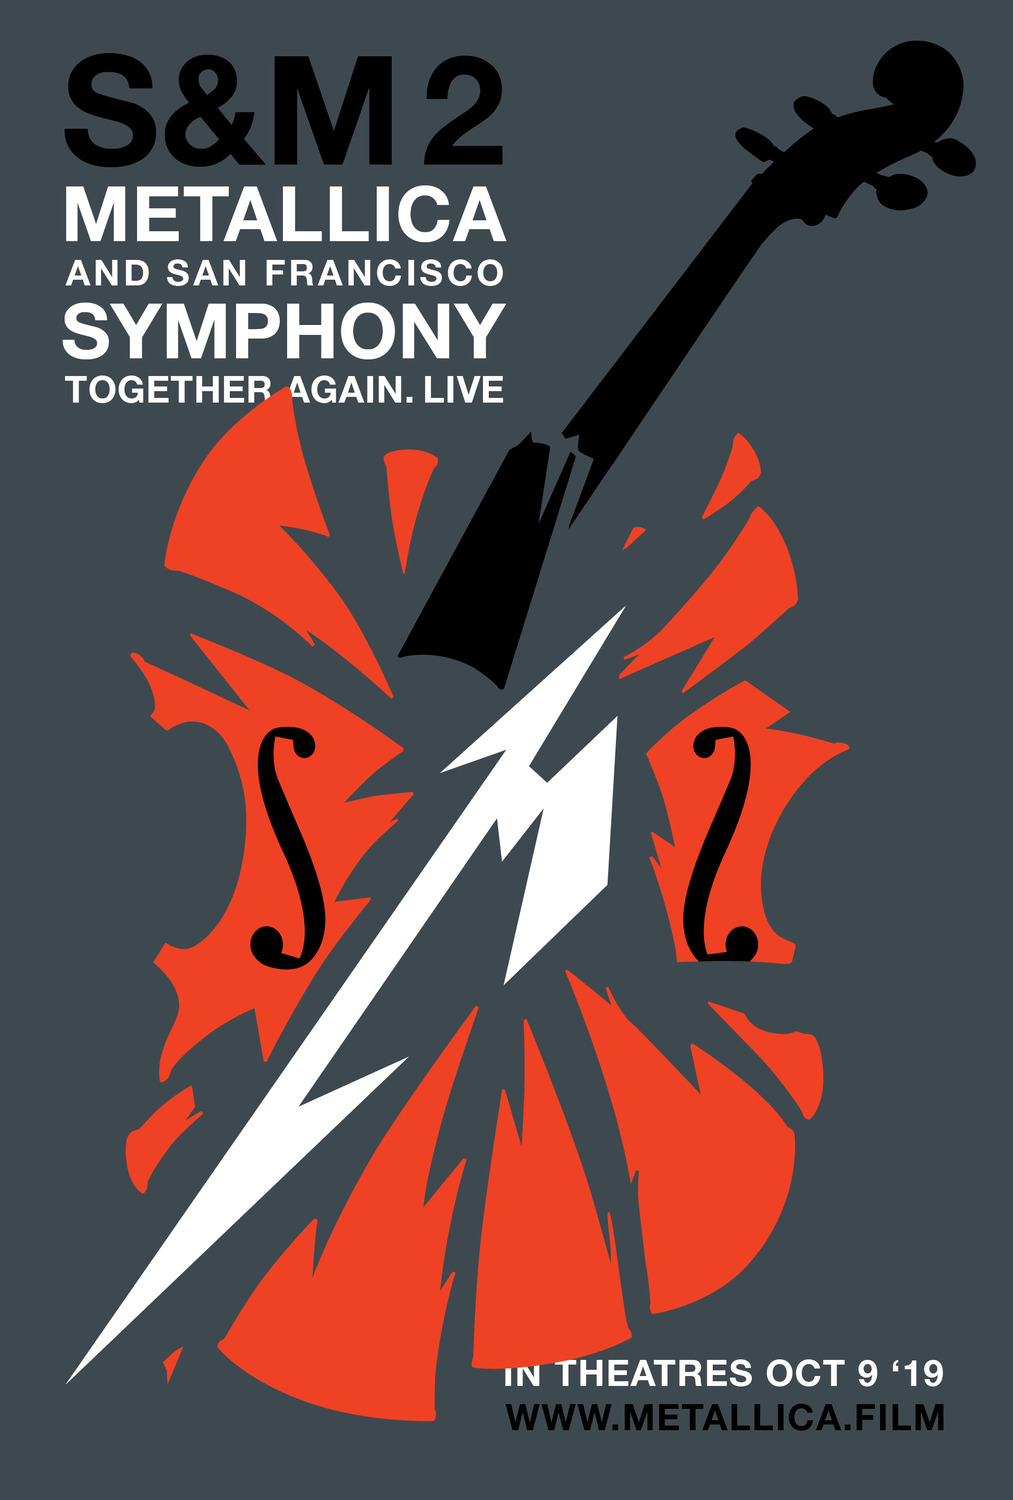 Extra Large Movie Poster Image for S&M 2: Metallica and San Francisco Symphony 